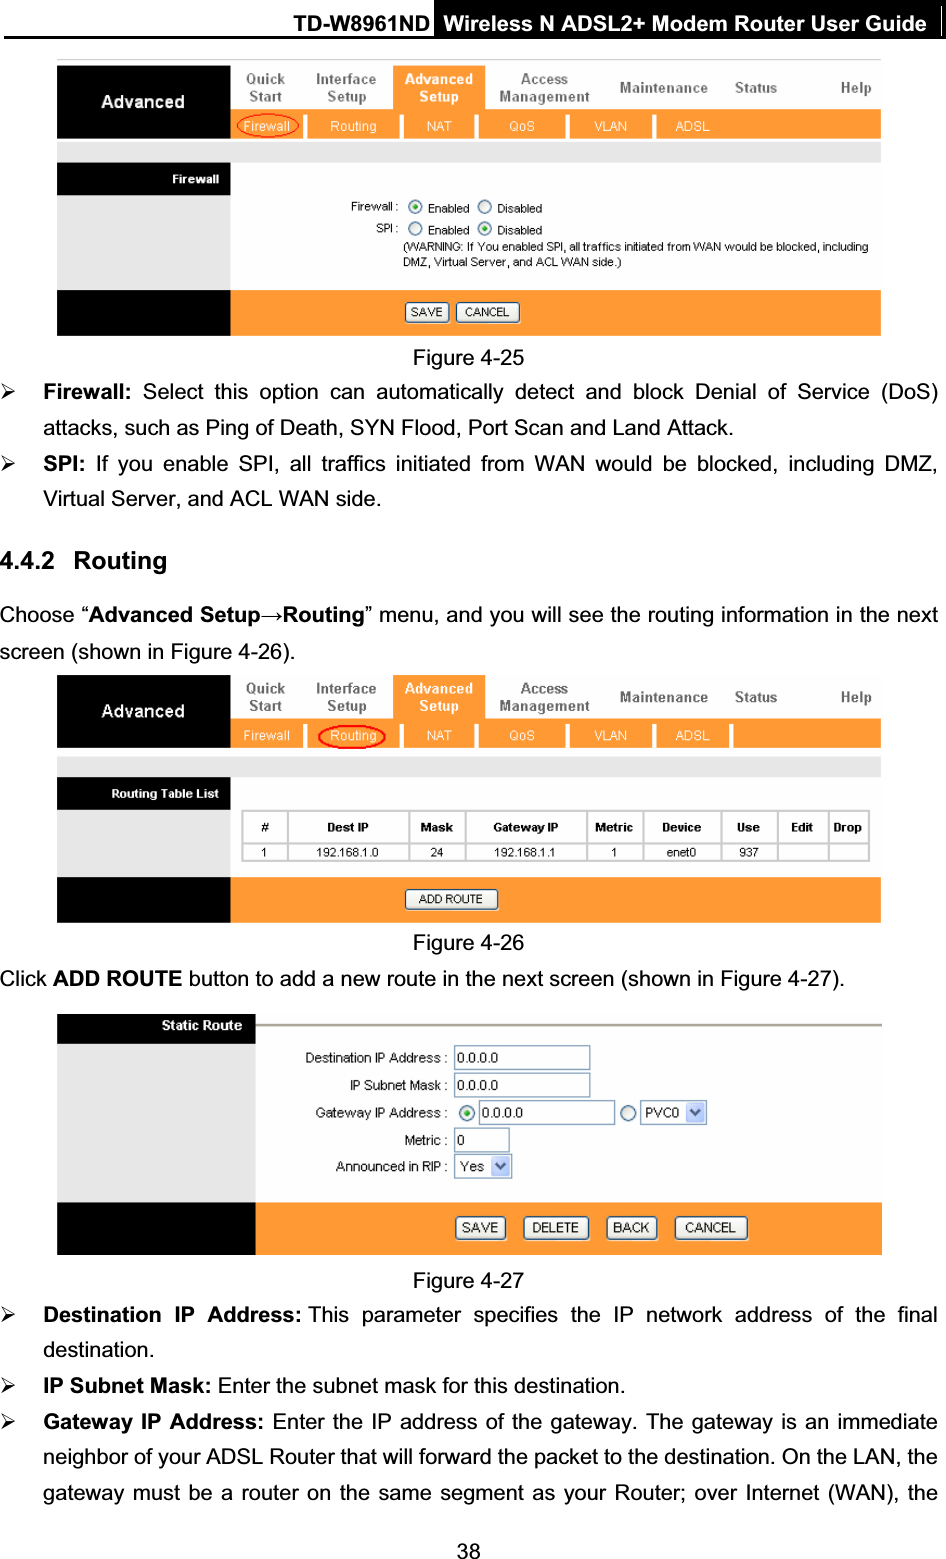 TD-W8961ND Wireless N ADSL2+ Modem Router User Guide38Figure 4-25 ¾Firewall:  Select this option can automatically detect and block Denial of Service (DoS) attacks, such as Ping of Death, SYN Flood, Port Scan and Land Attack.¾SPI: If you enable SPI, all traffics initiated from WAN would be blocked, including DMZ, Virtual Server, and ACL WAN side.4.4.2 RoutingChoose “Advanced SetupĺRouting” menu, and you will see the routing information in the next screen (shown in Figure 4-26).Figure 4-26 Click ADD ROUTE button to add a new route in the next screen (shown in Figure 4-27). Figure 4-27 ¾Destination IP Address: This parameter specifies the IP network address of the final destination.¾IP Subnet Mask: Enter the subnet mask for this destination. ¾Gateway IP Address: Enter the IP address of the gateway. The gateway is an immediate neighbor of your ADSL Router that will forward the packet to the destination. On the LAN, the gateway must be a router on the same segment as your Router; over Internet (WAN), the 